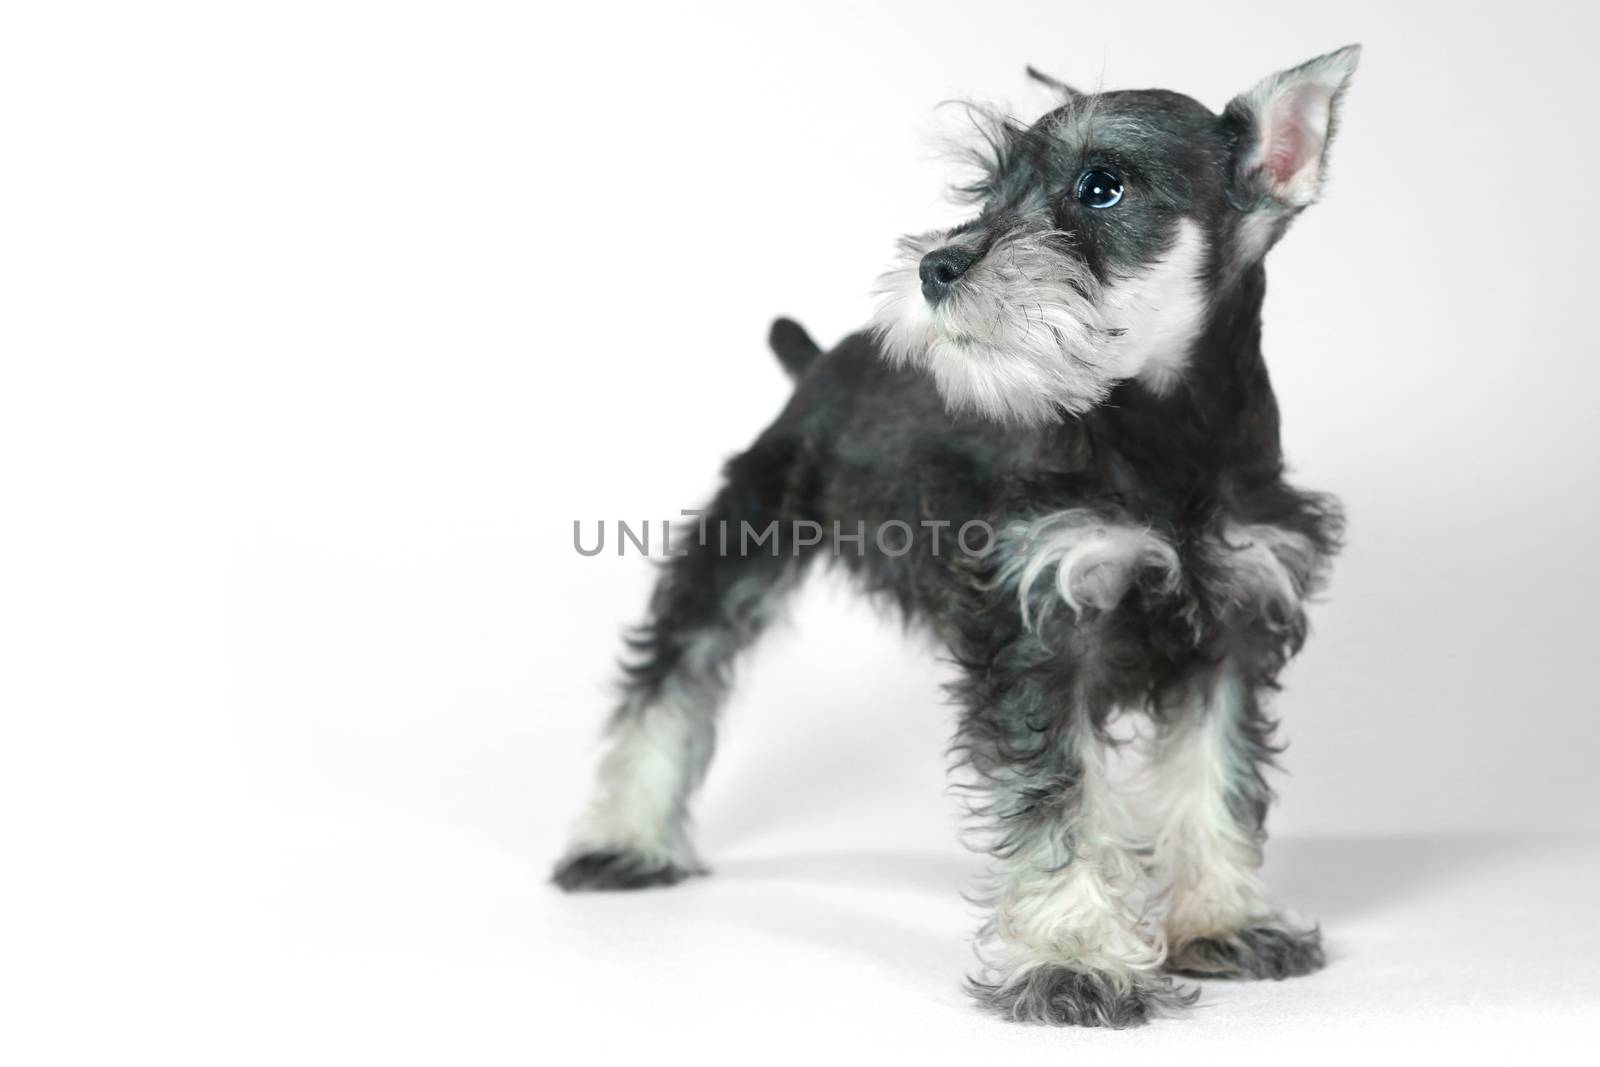 Adorable and Cute Baby Miniature Schnauzer Puppy Dog on White